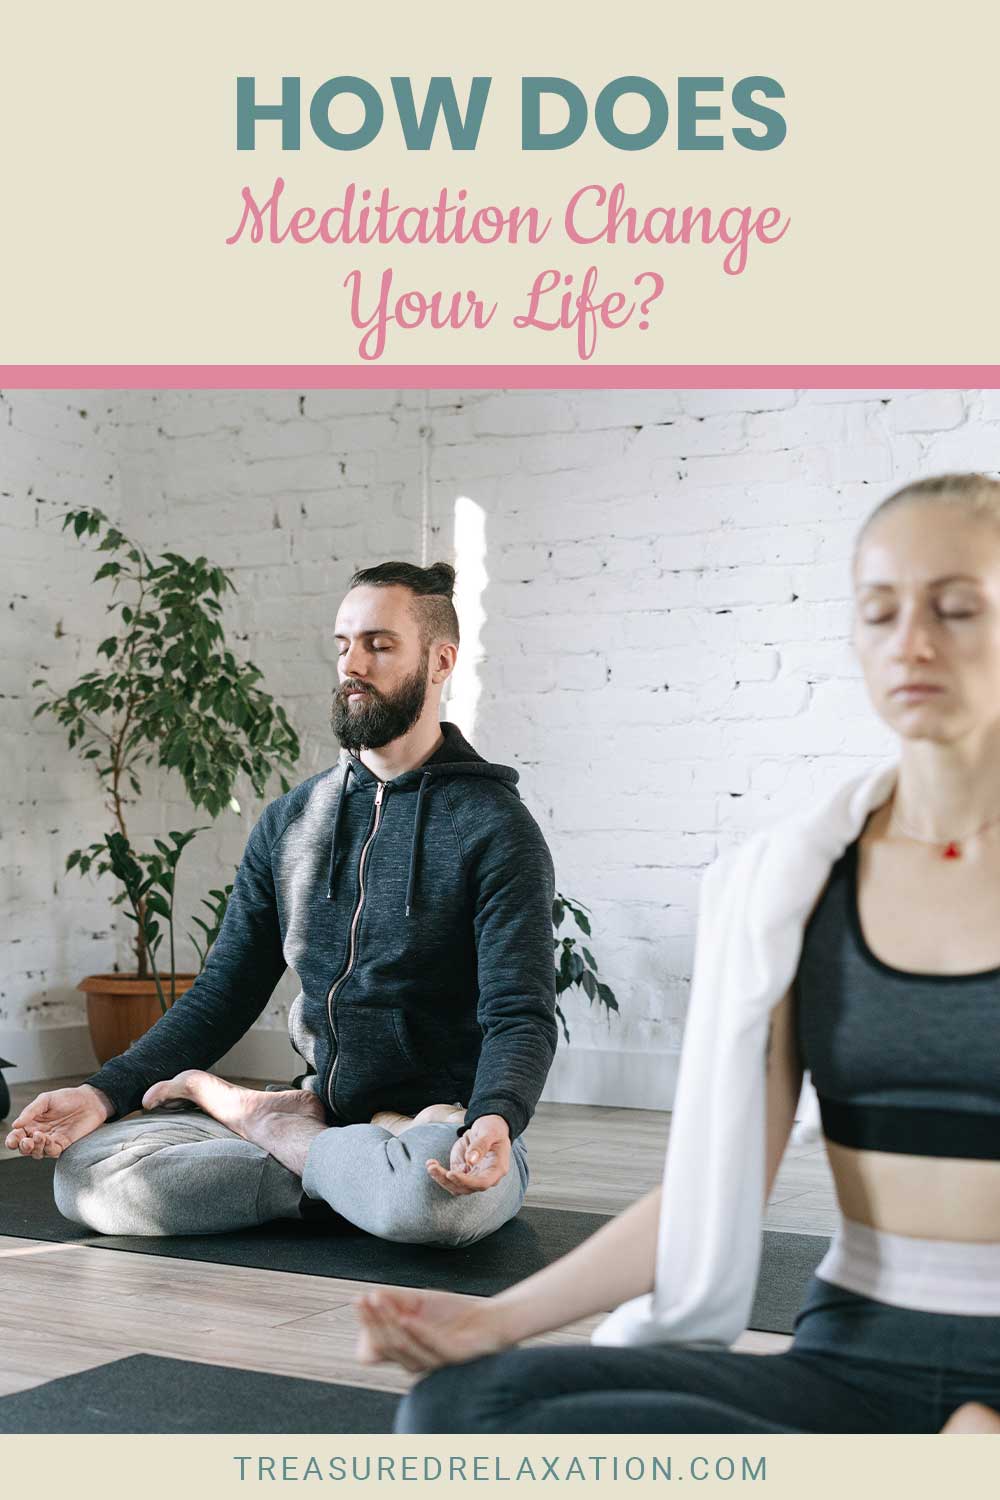 Man and woman meditating in a room - How Does Meditation Change Your Life?